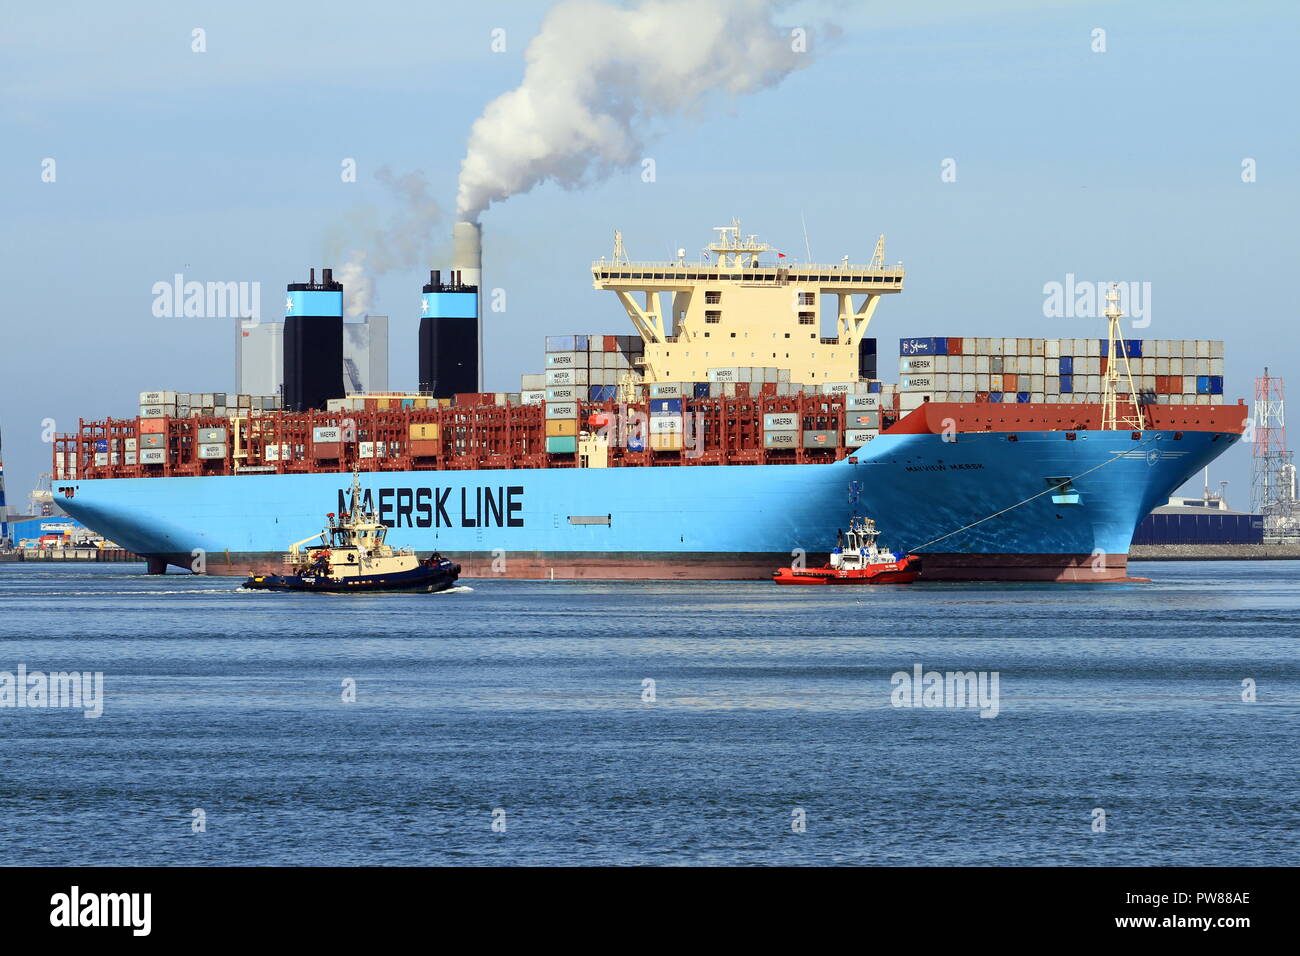 The container ship Mayview Maersk will be shot on May 24, 2015 in the Port of Rotterdam. Stock Photo